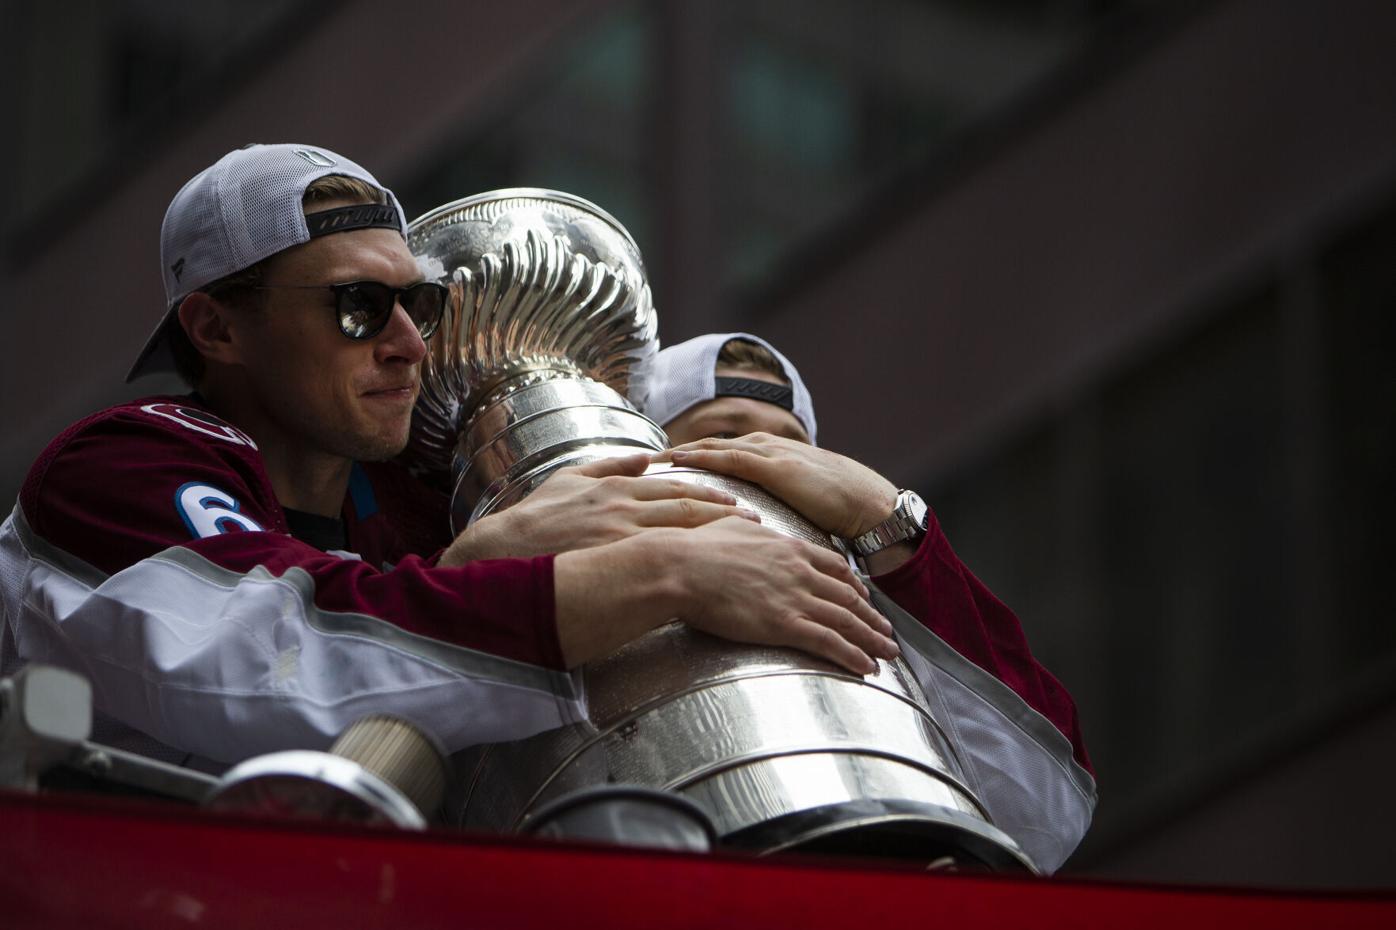 Erik Johnson Deserves to Win the Stanley Cup with the Avalanche